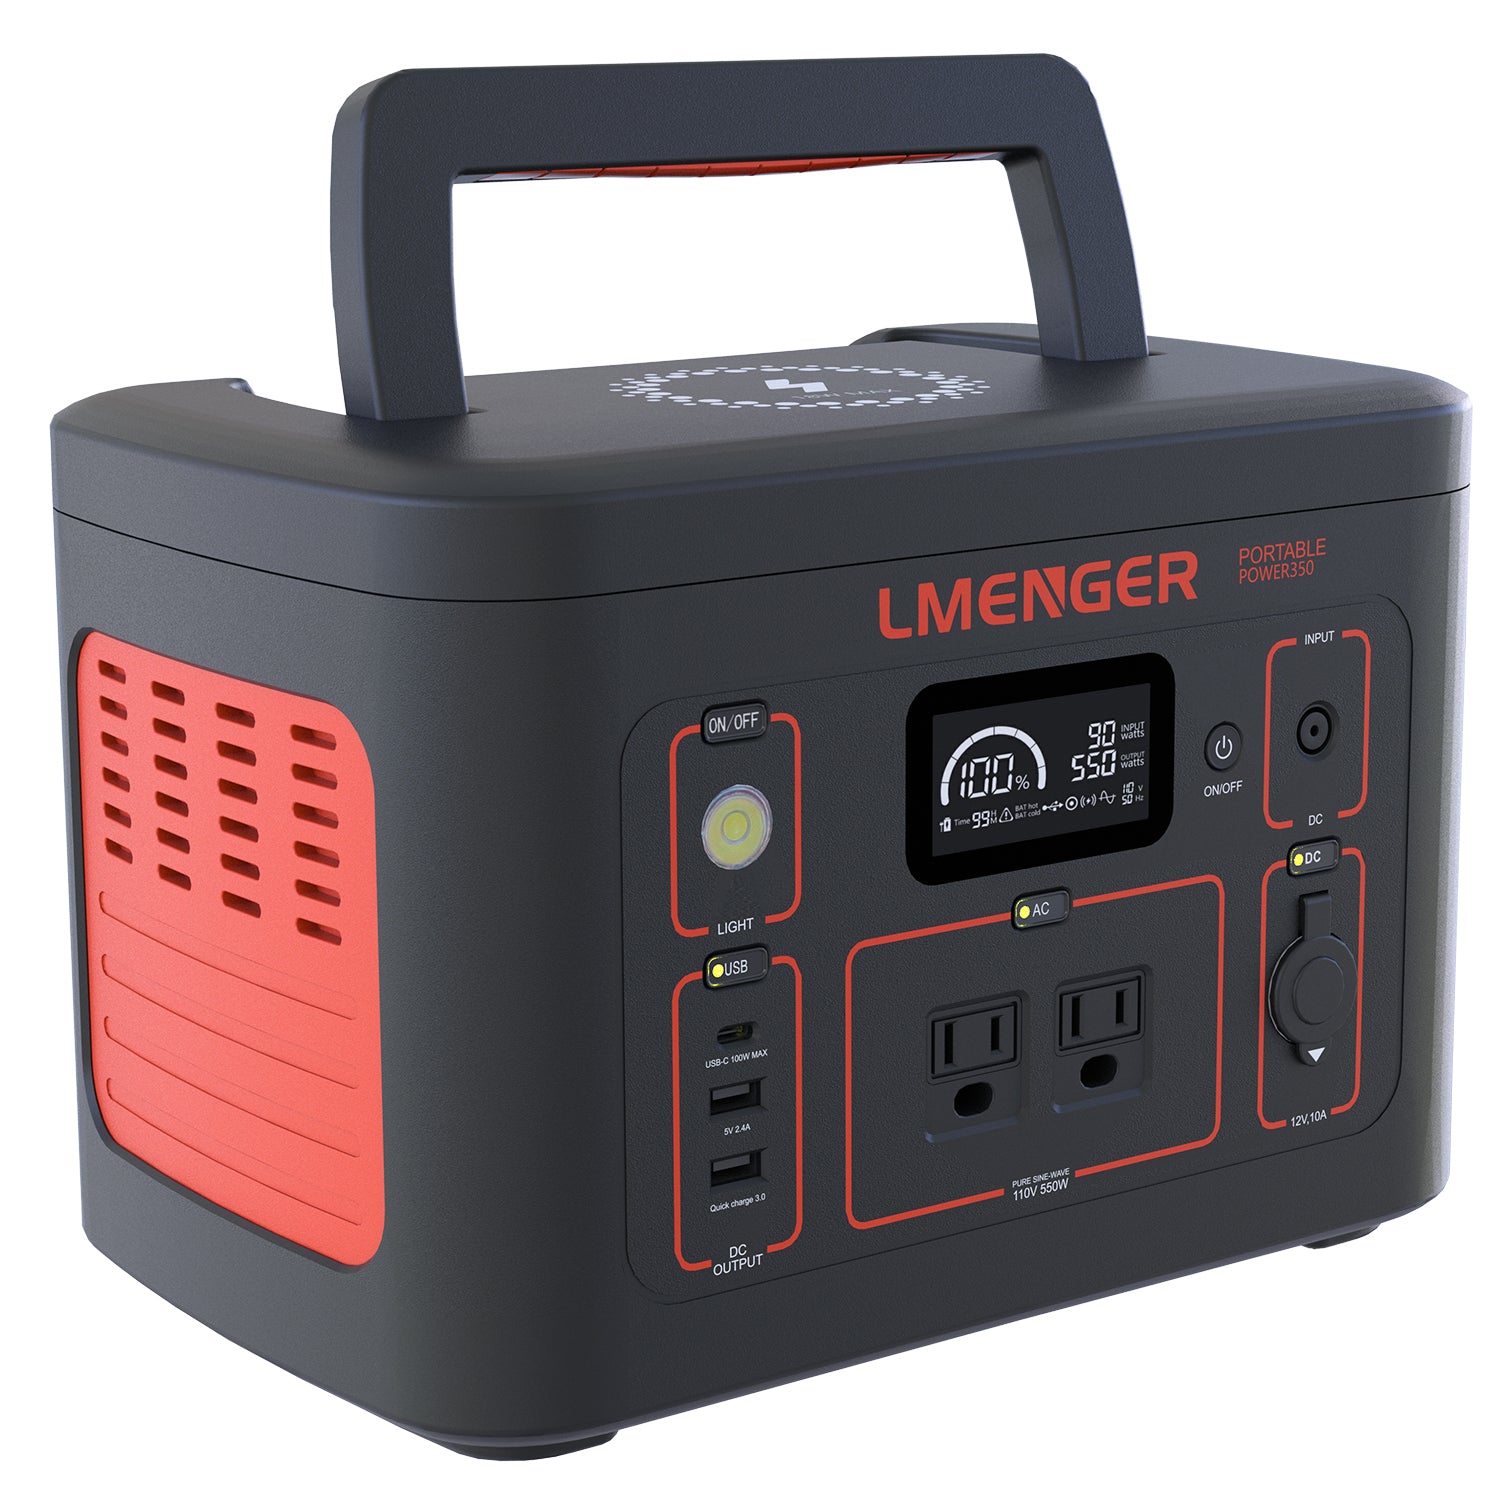 LMENGER K3 Pro Portable Power Station 550W/326Wh with Wireless Charge on Top